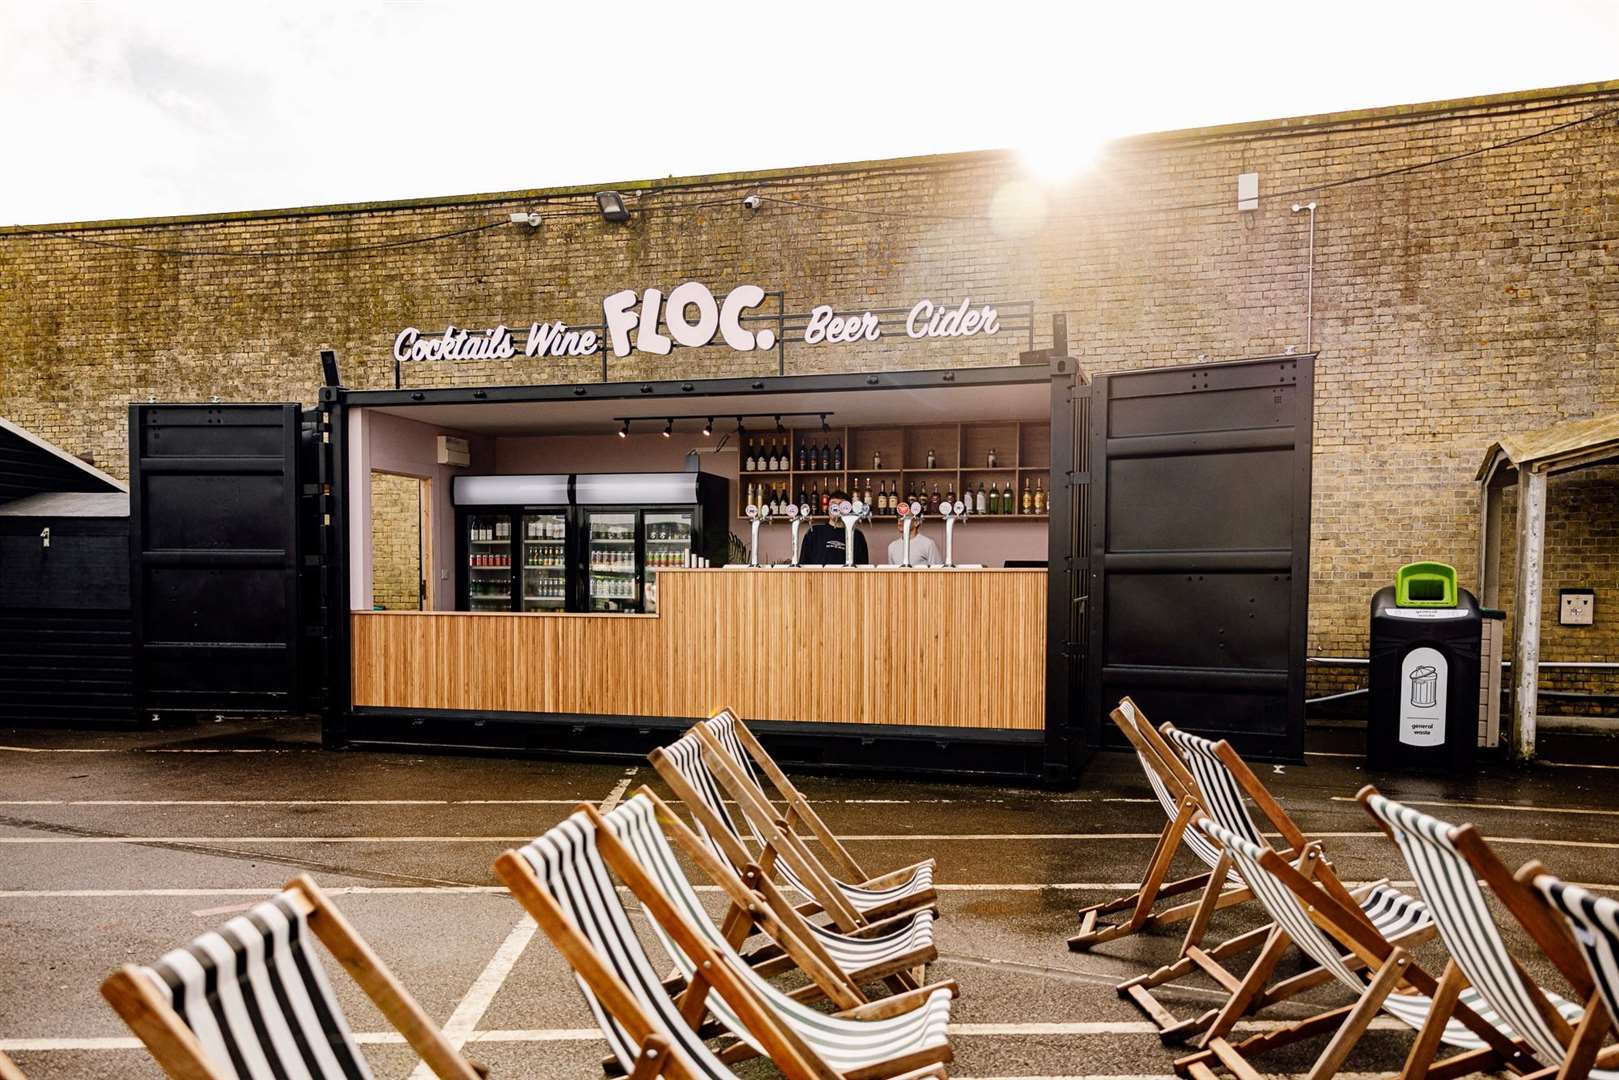 It is one of 10 independent bars and street-food vendors located there. Picture: Floc. Brewery